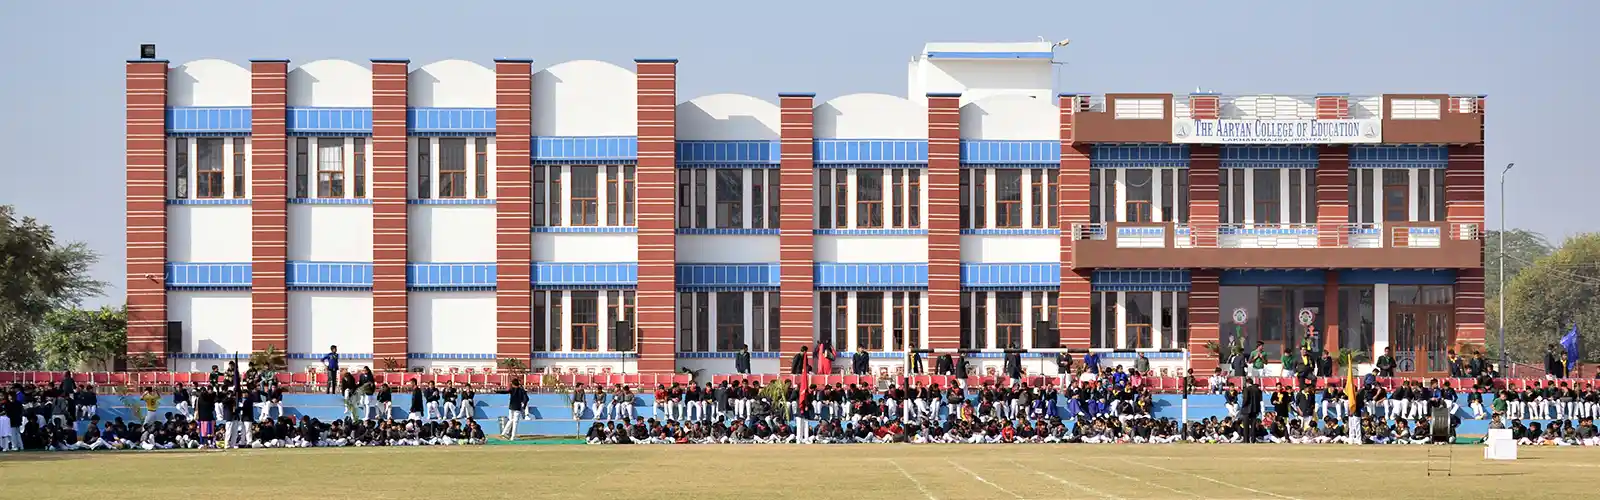 The Aaryan College of Education Banner